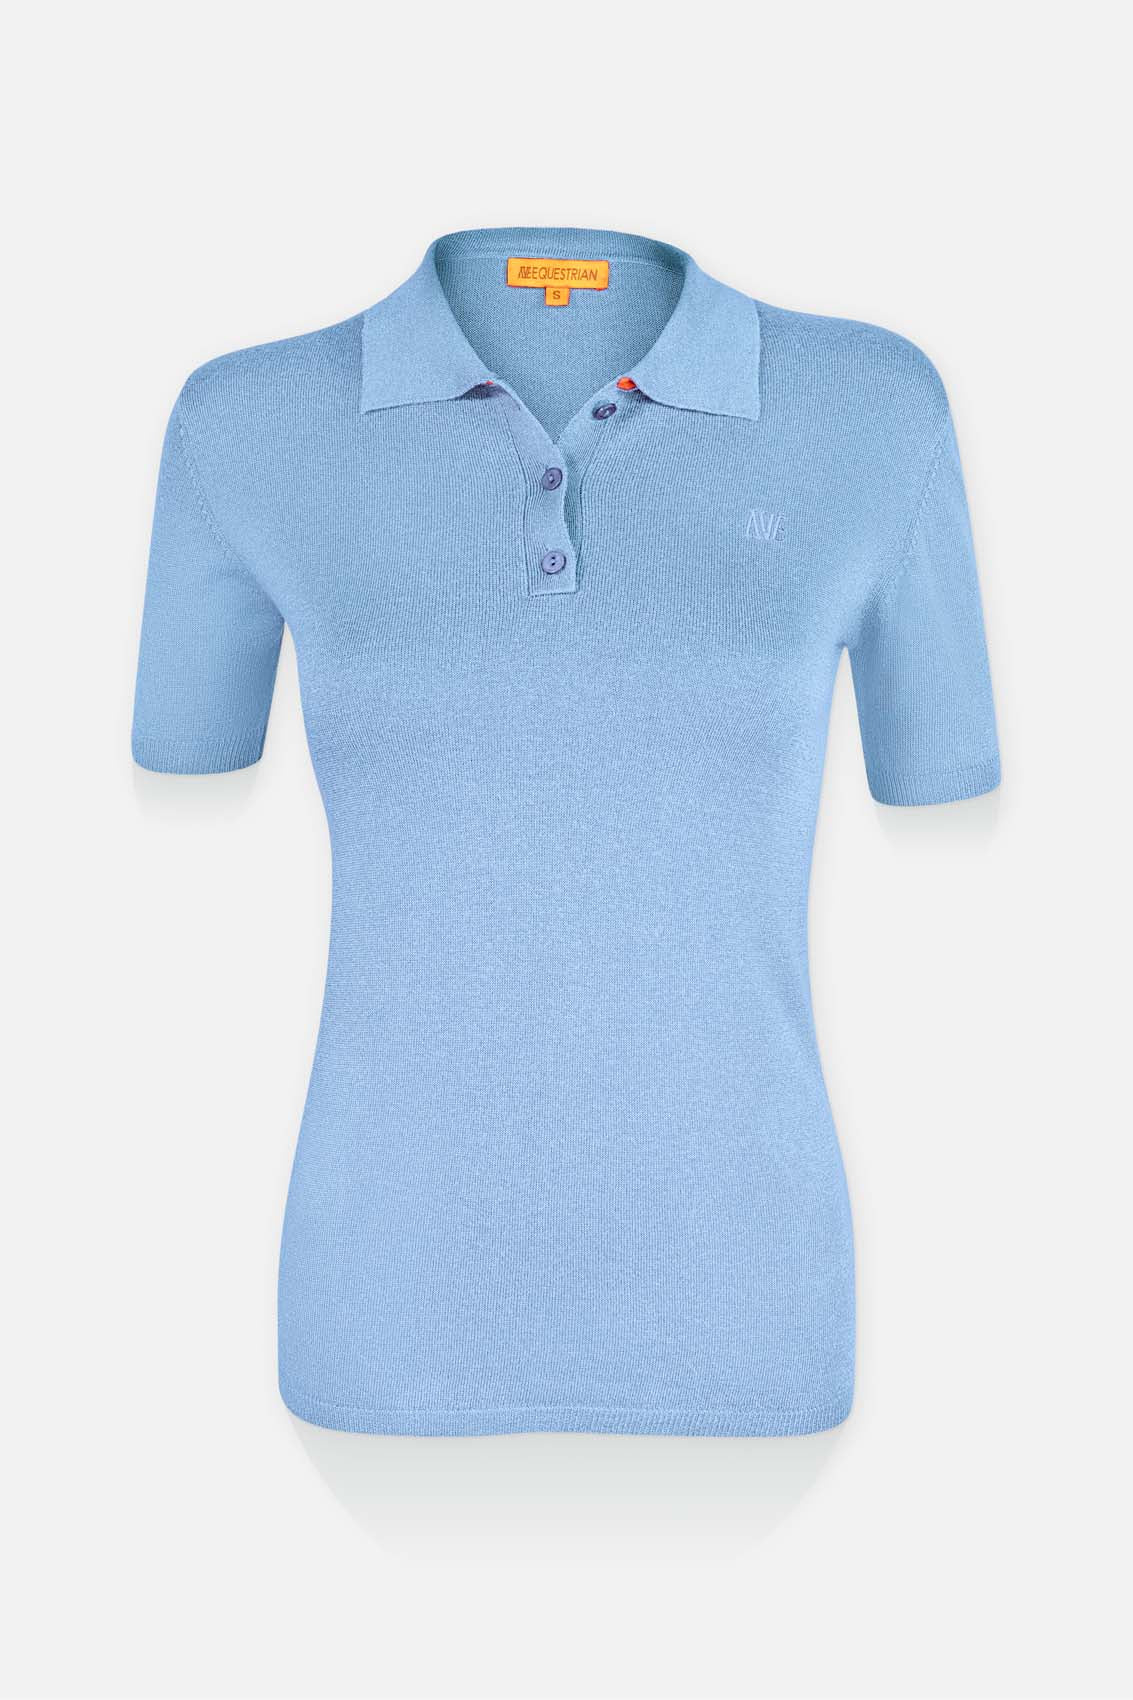 Women's polo t-shirt made of cashmere and silk